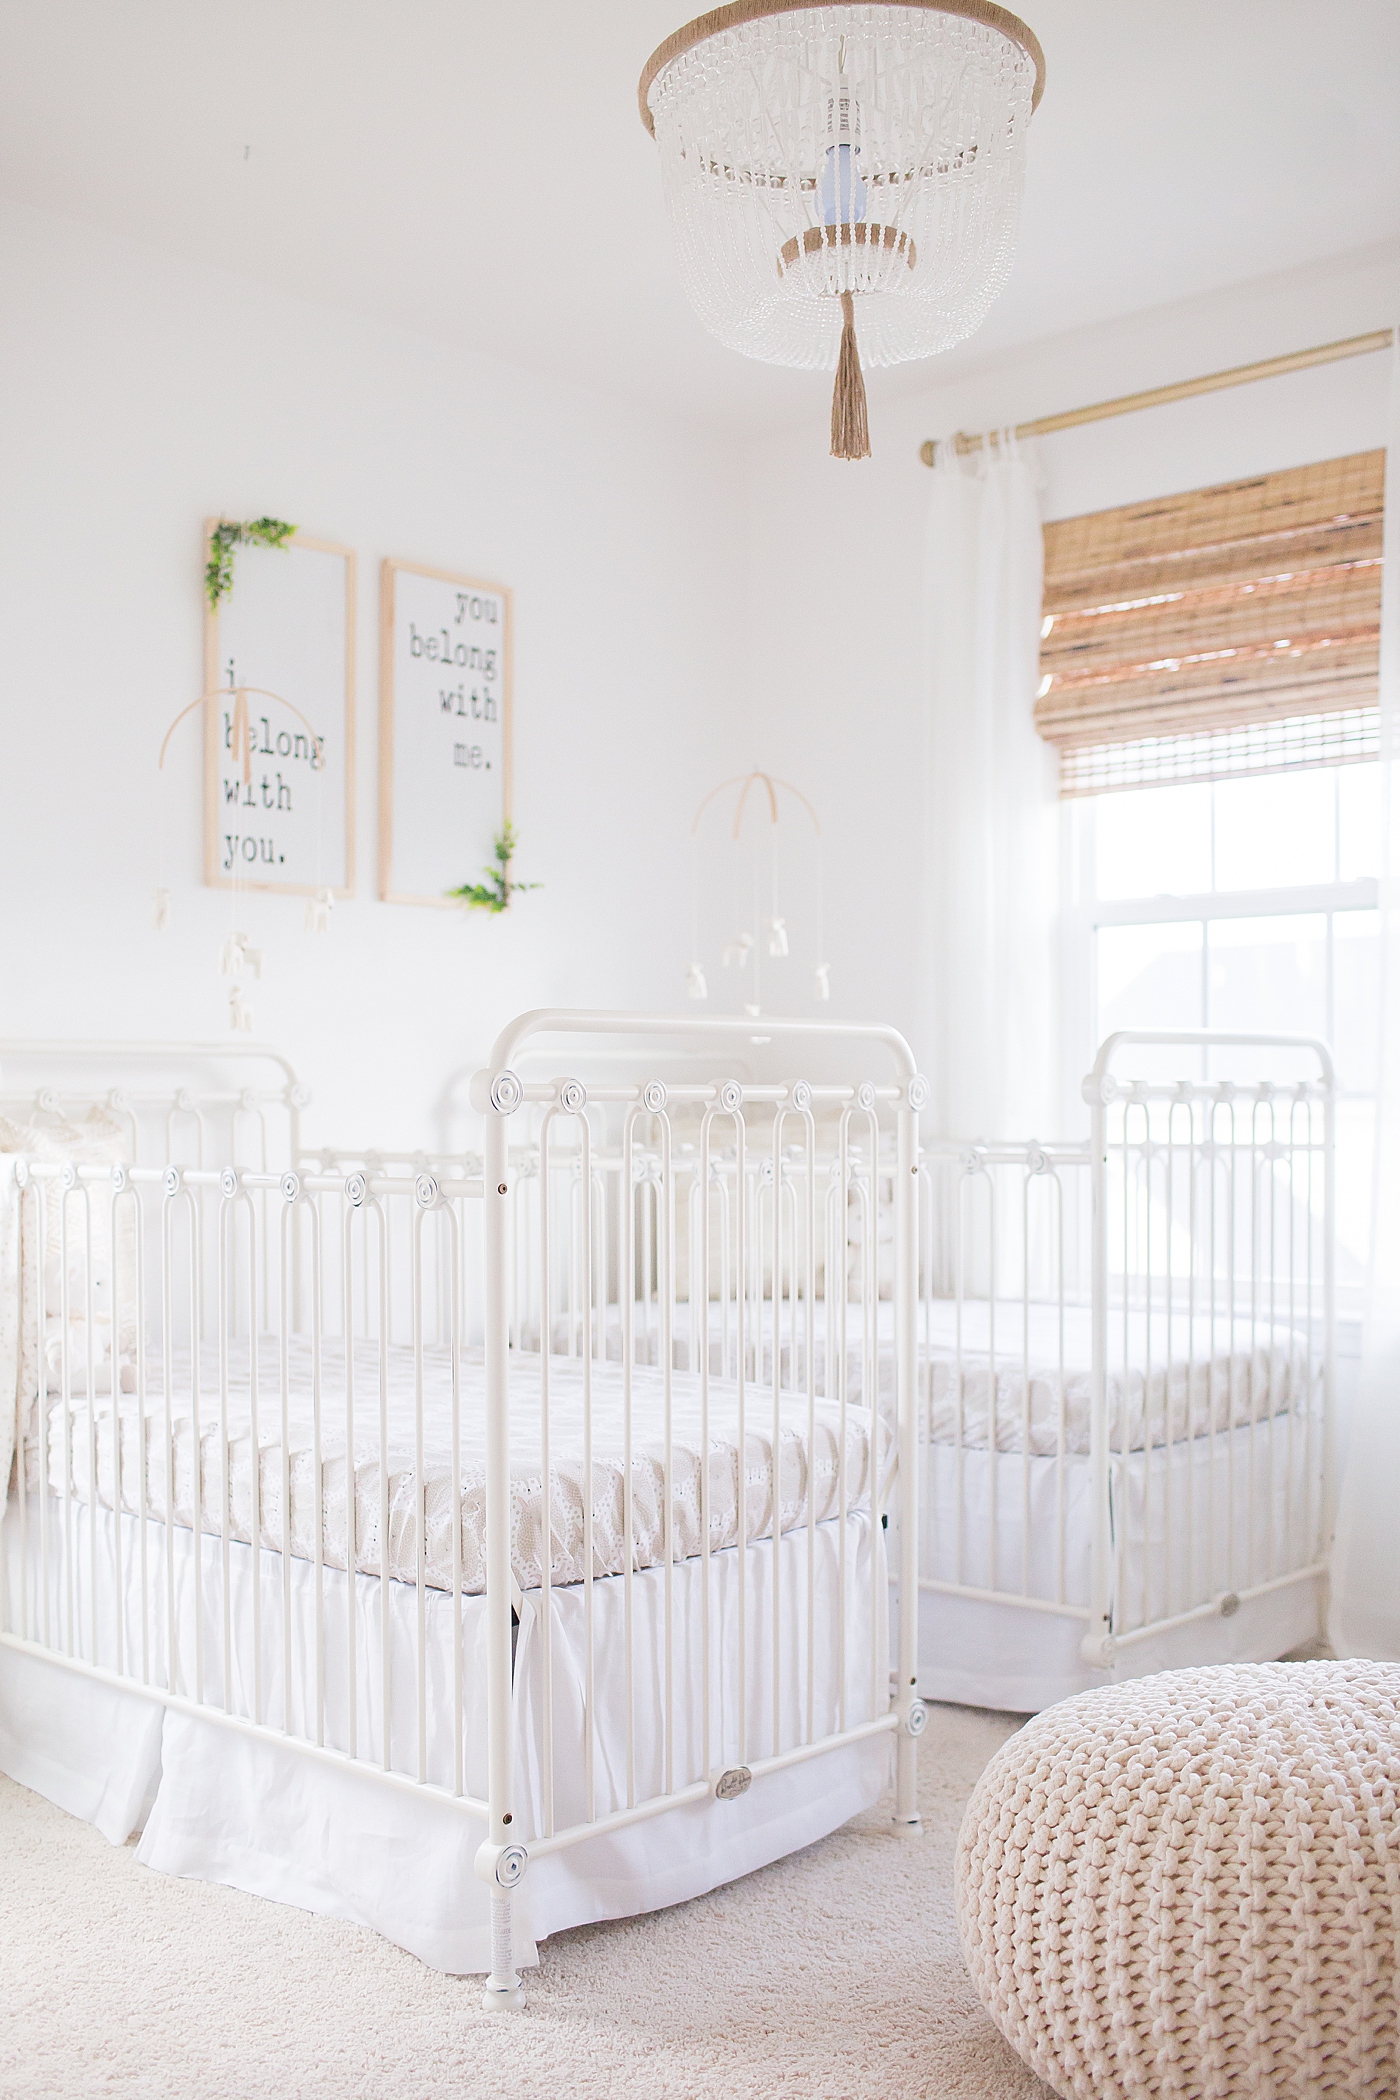 Gender neutral twin nursery | Image by Emily Gerald Photography